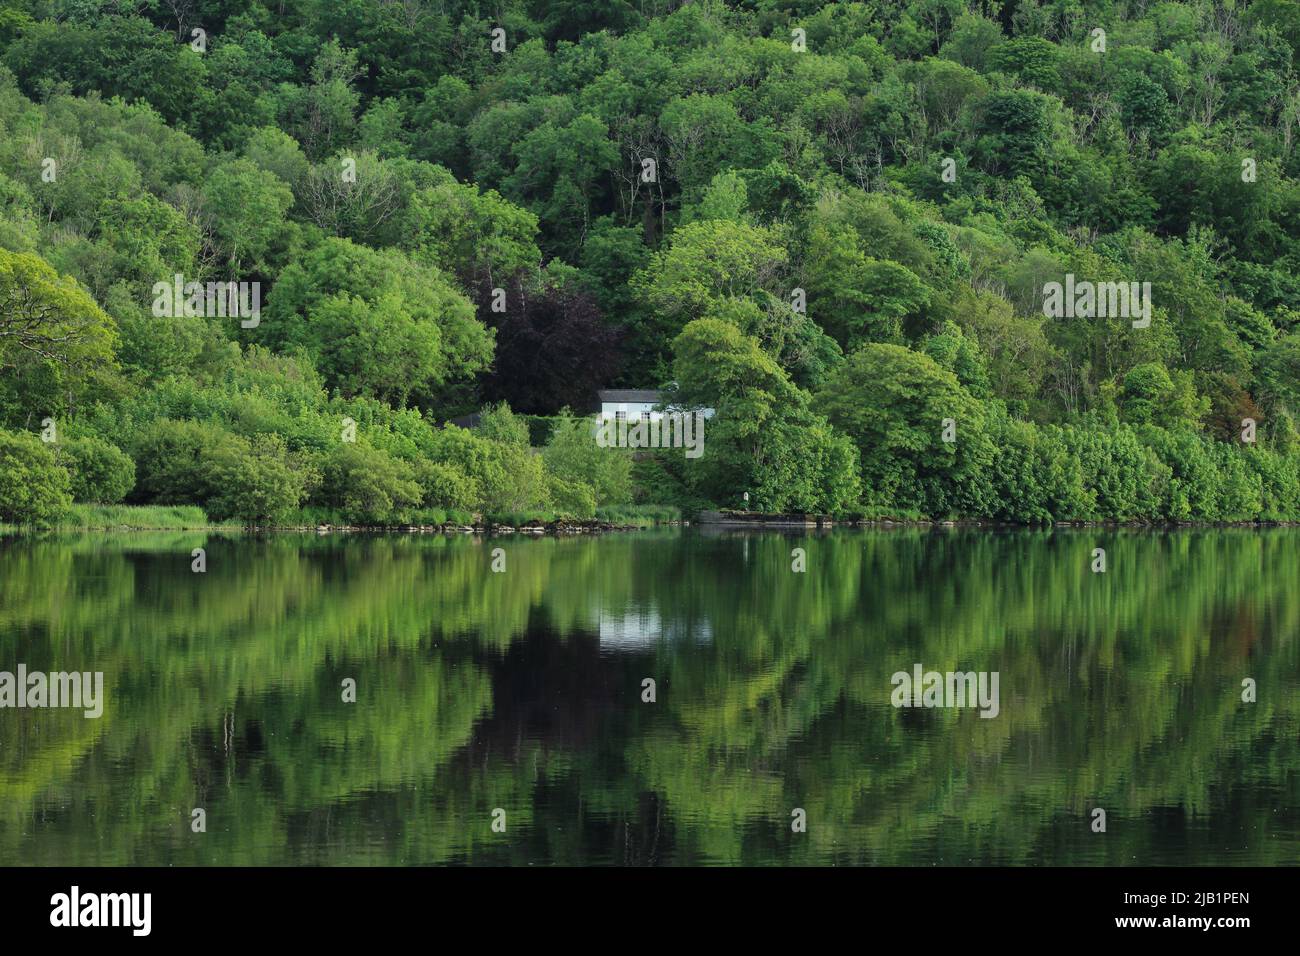 Cottage house nestled amongst greenery of trees in forest reflected in still waters of Lough Gill, situated in rural County Leitrim, Ireland Stock Photo